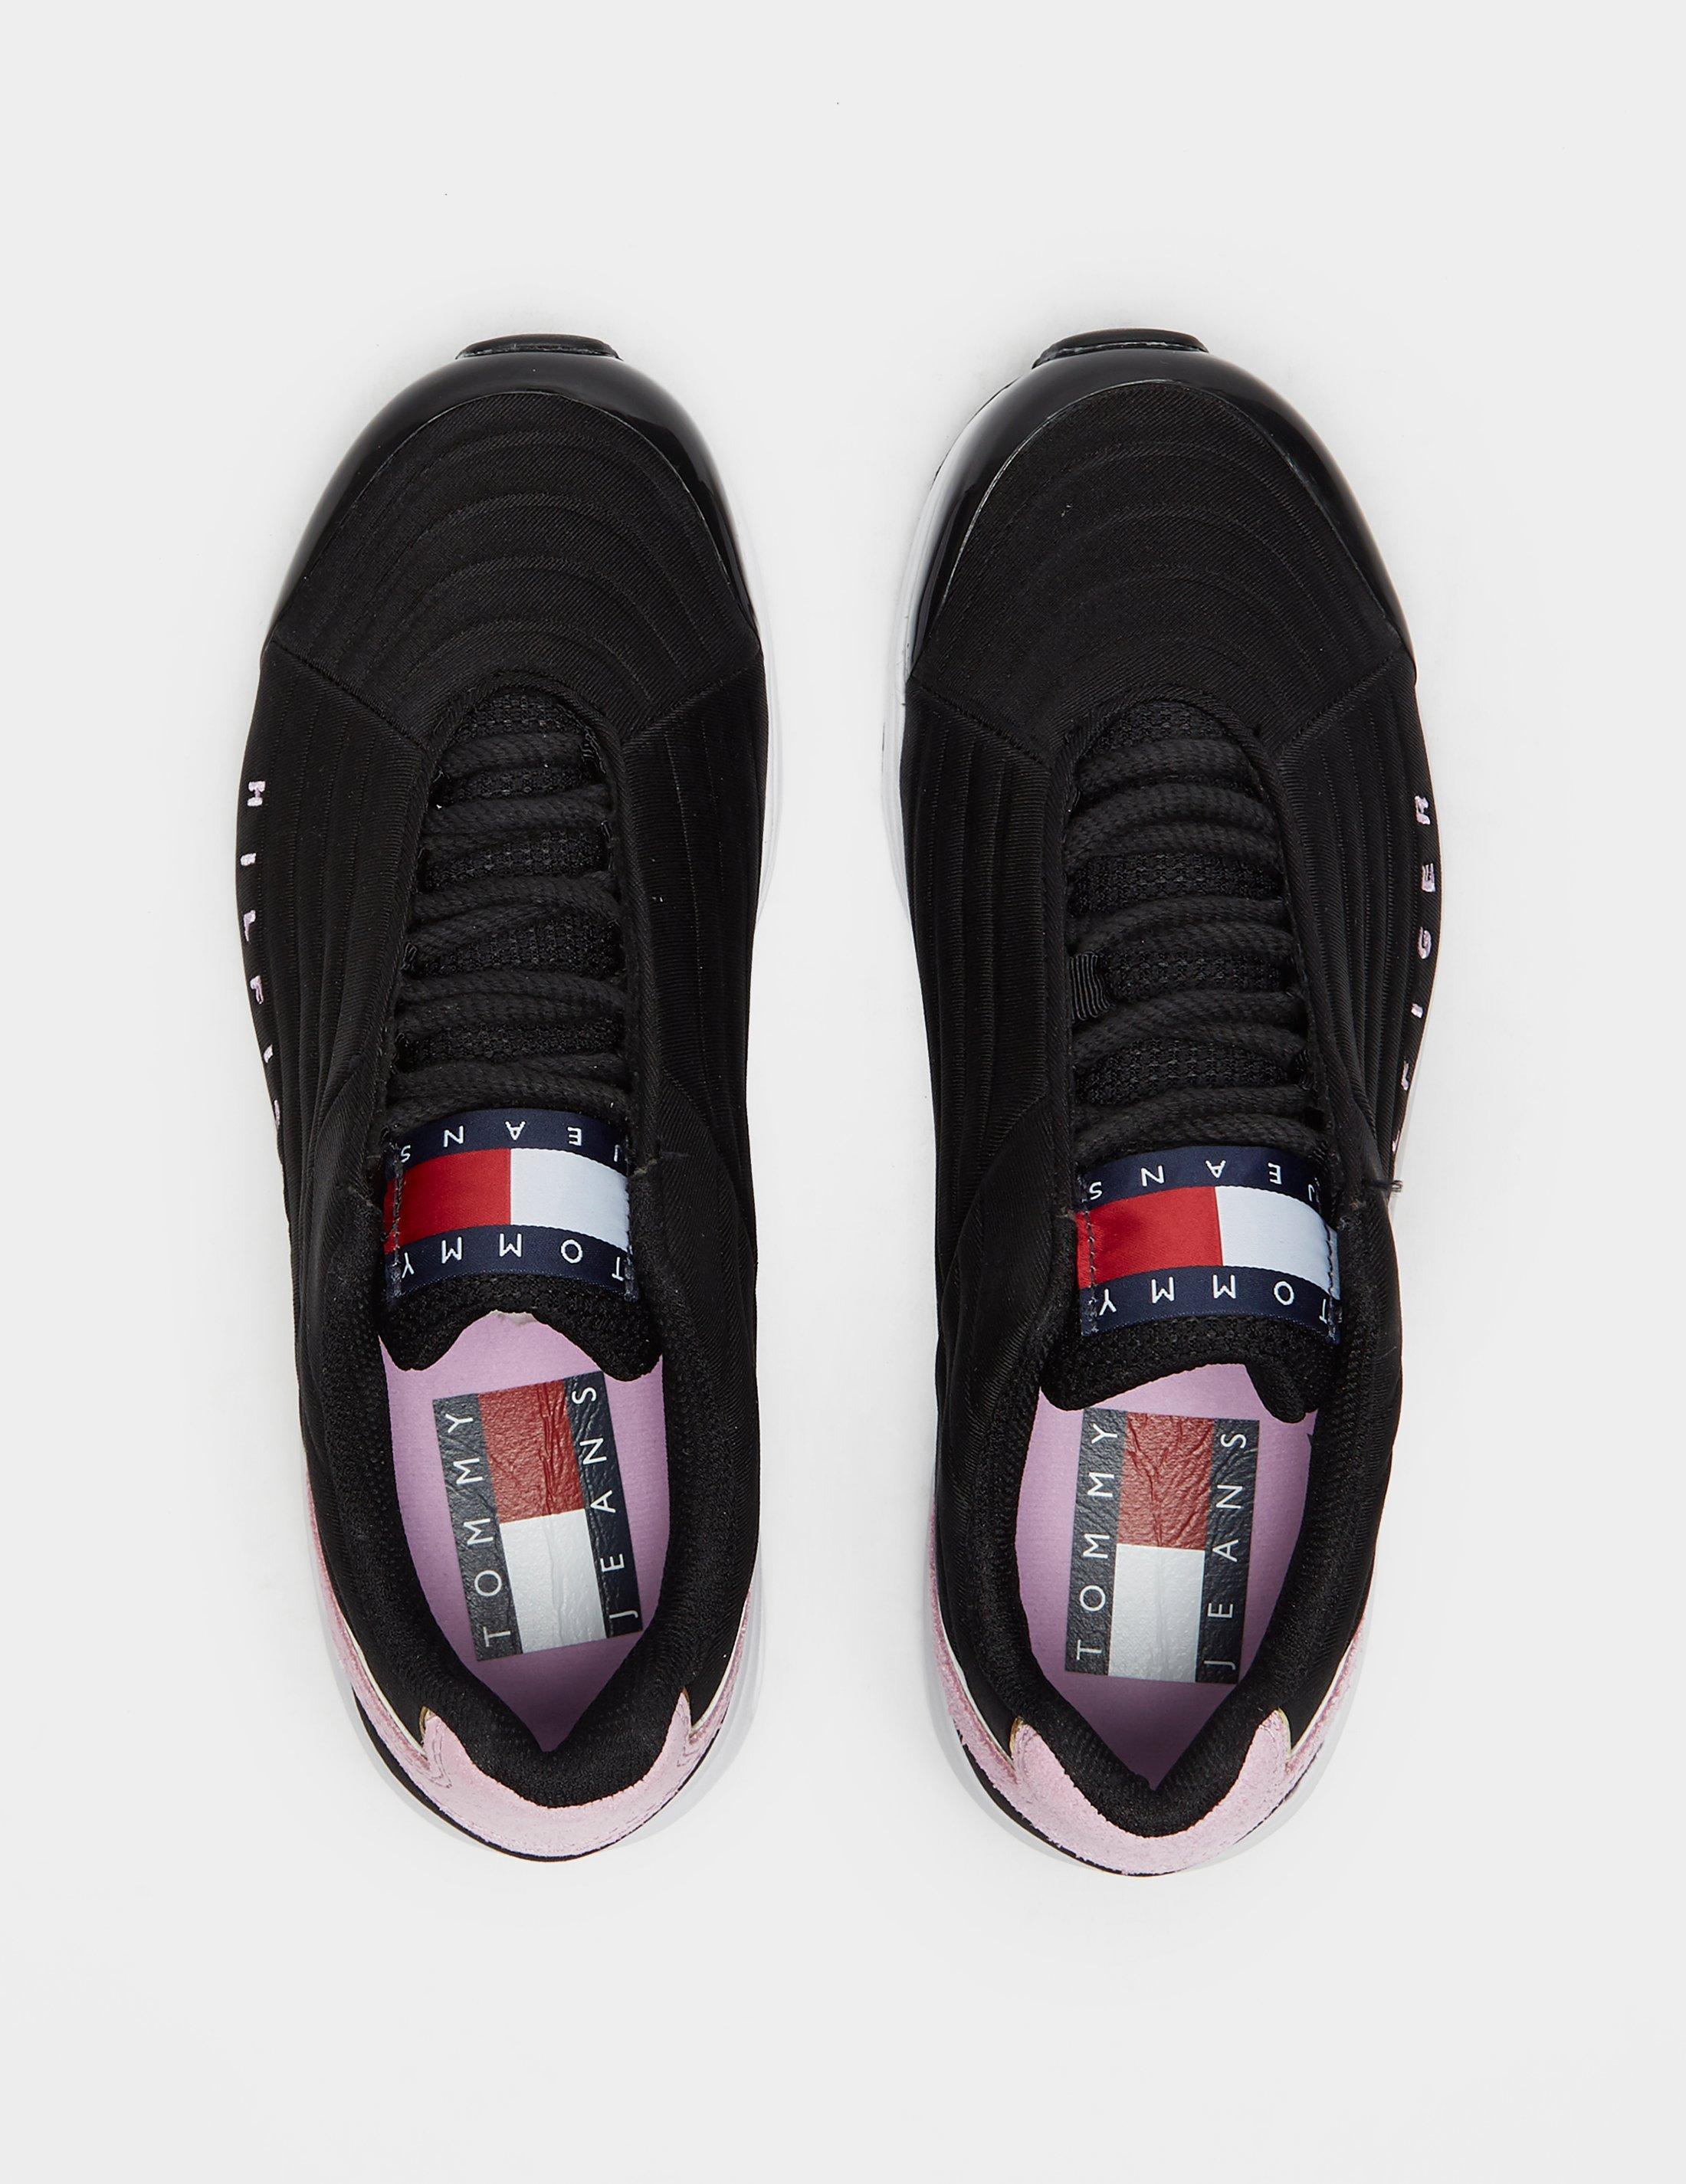 Tommy Hilfiger Heritage Trainers Black Britain, SAVE 60% - aveclumiere.com